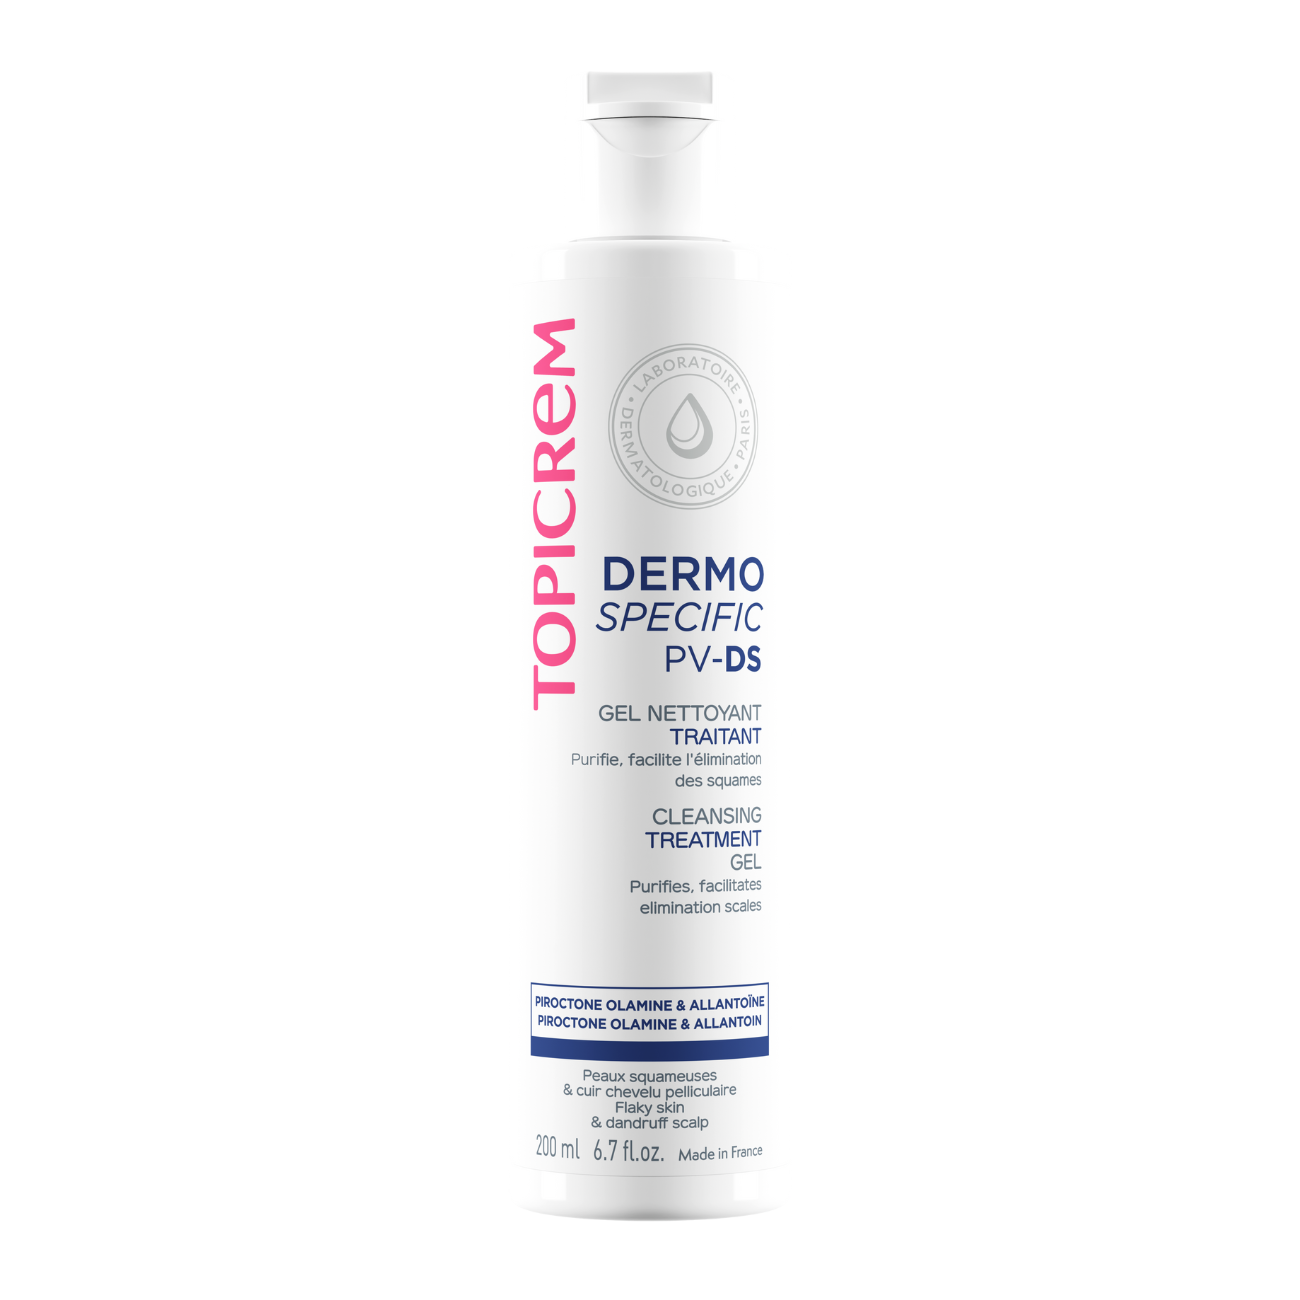 PV-DS CLEANSING GEL